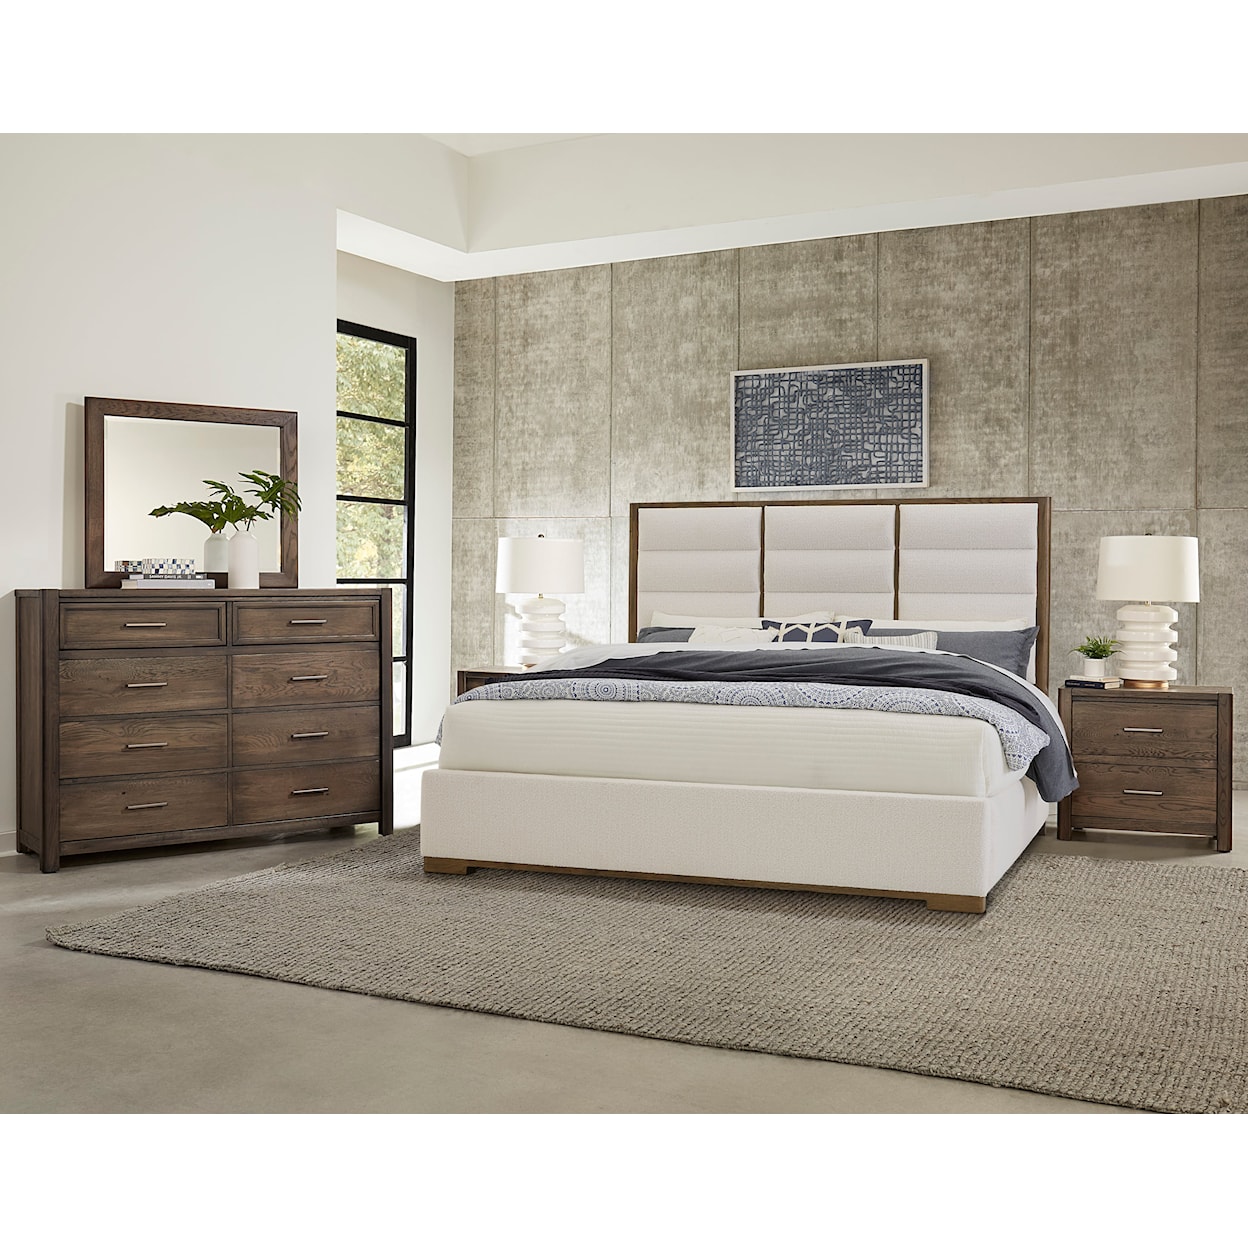 Vaughan Bassett Crafted Oak - Aged Grey Upholstered Queen Panel Bed